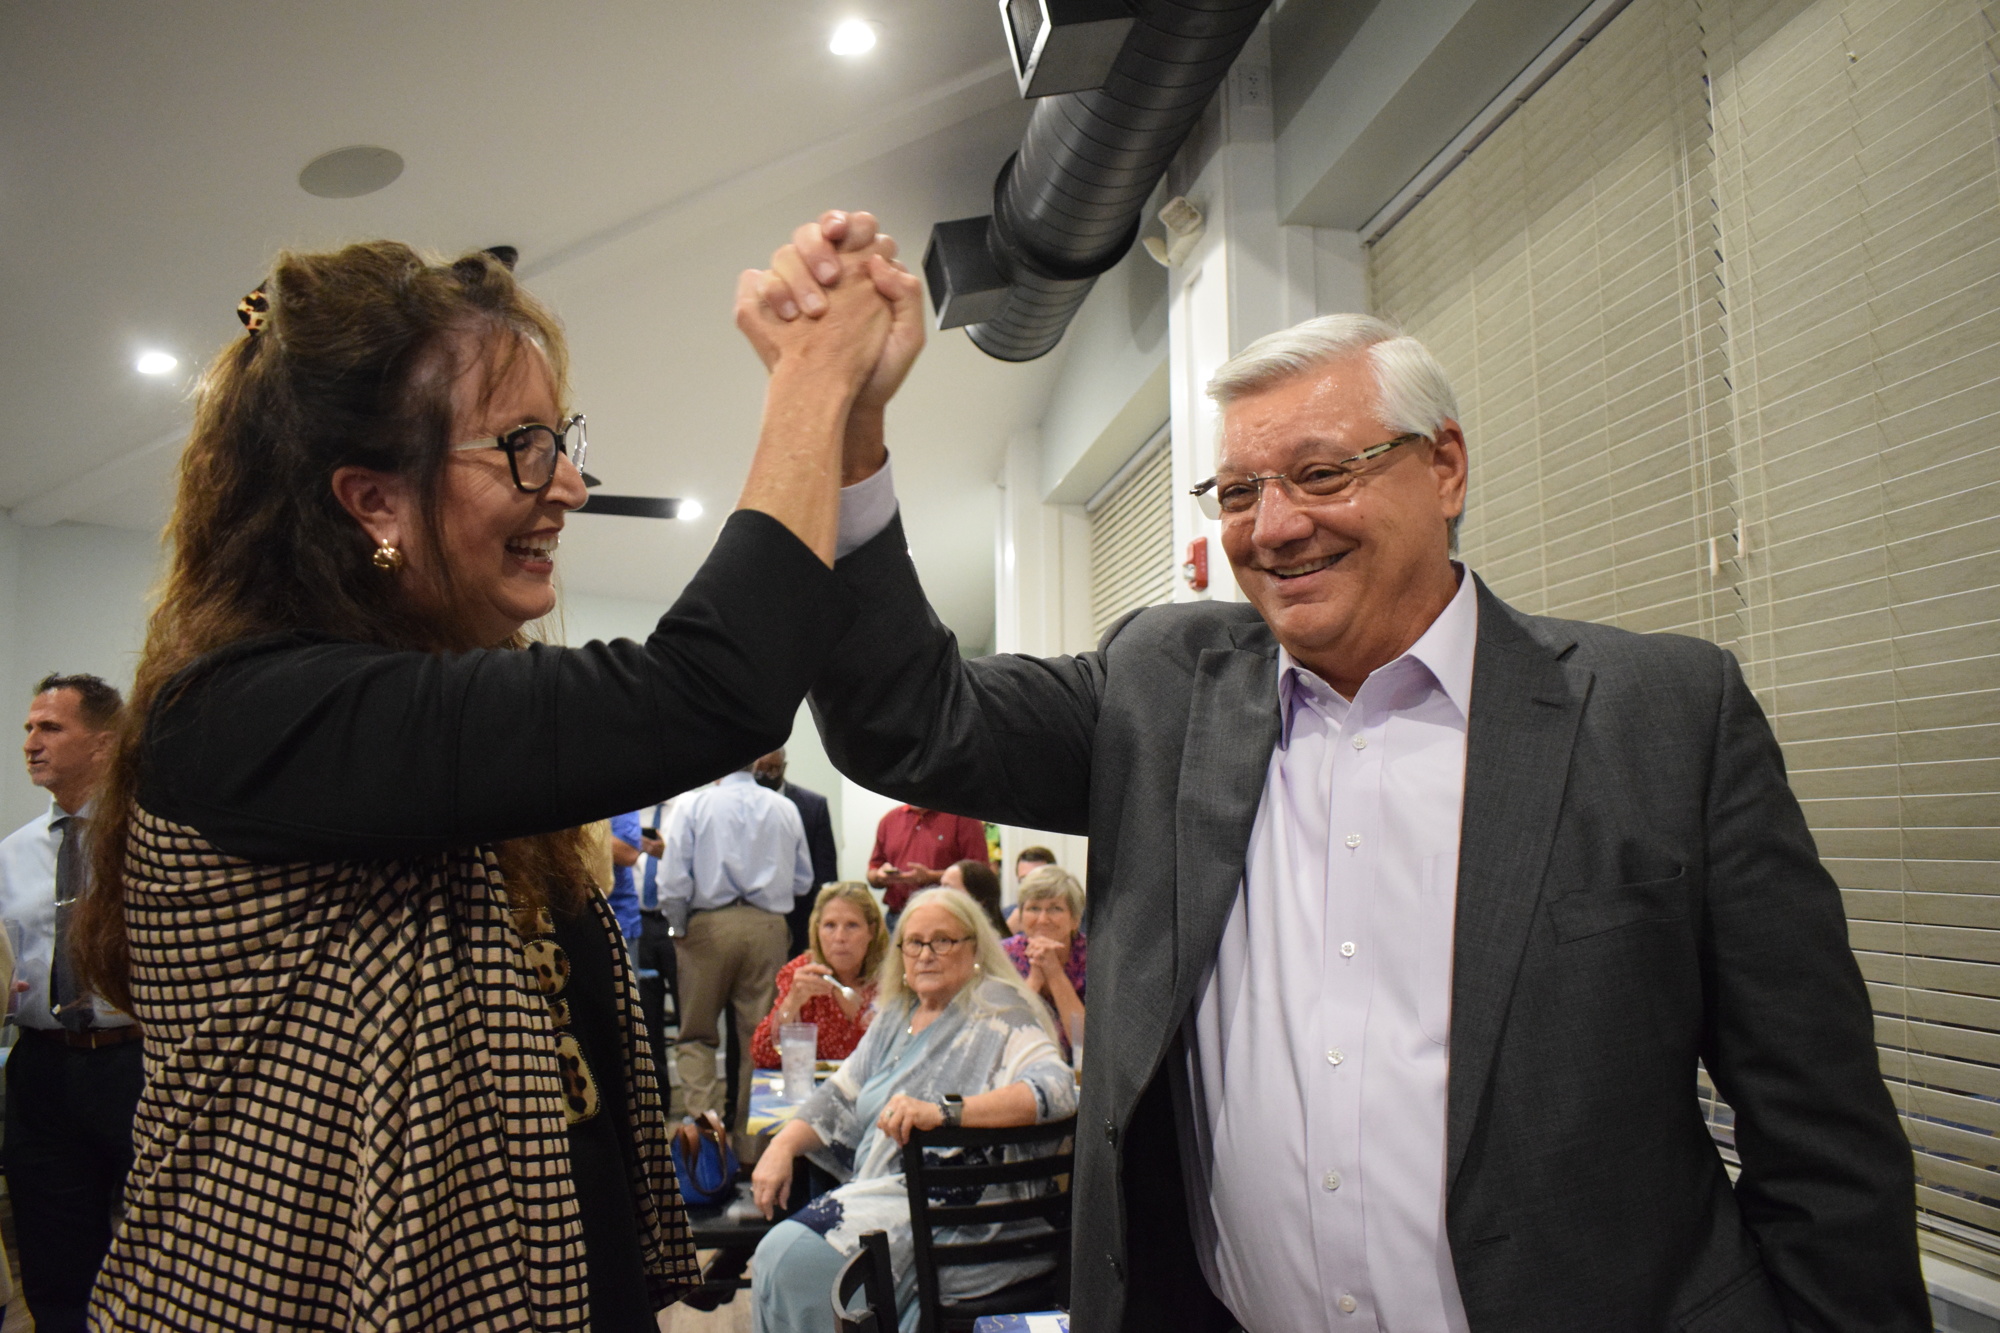 Cynthia Saunders, the superintendent of the School District of Manatee County, celebrates the renewal of the district's 1-mill property tax referendum with Ernie Withers, a co-chair of Forward Manatee.